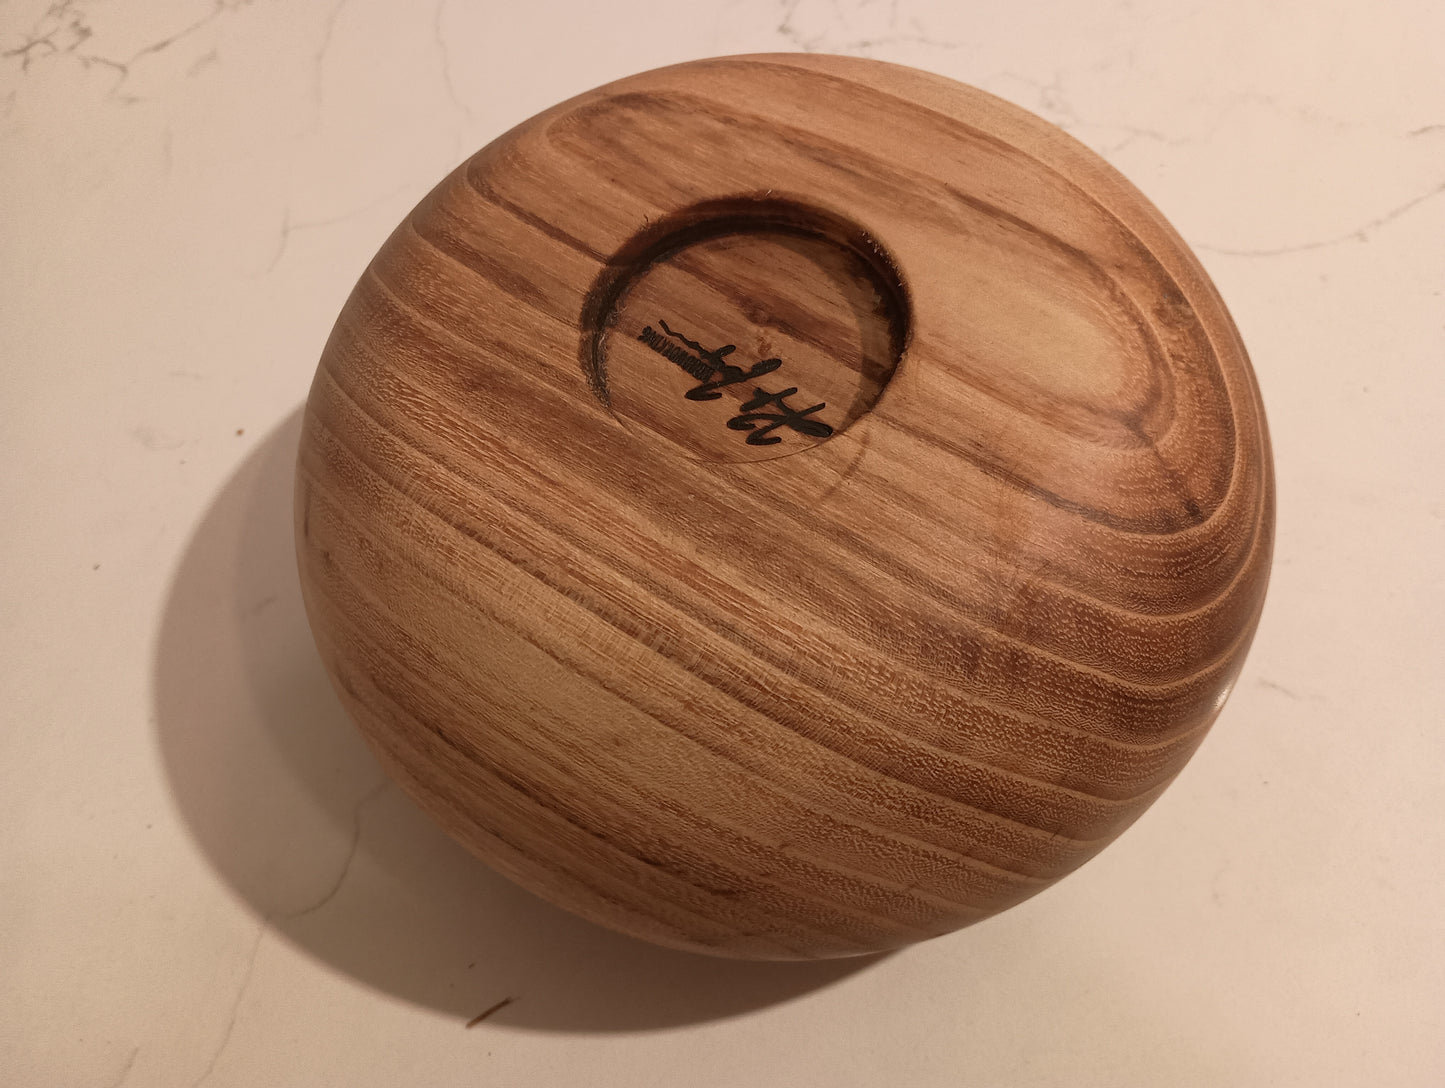 Natural Edge Elm Turned Bowl, roughly 7.25" x 3.5"